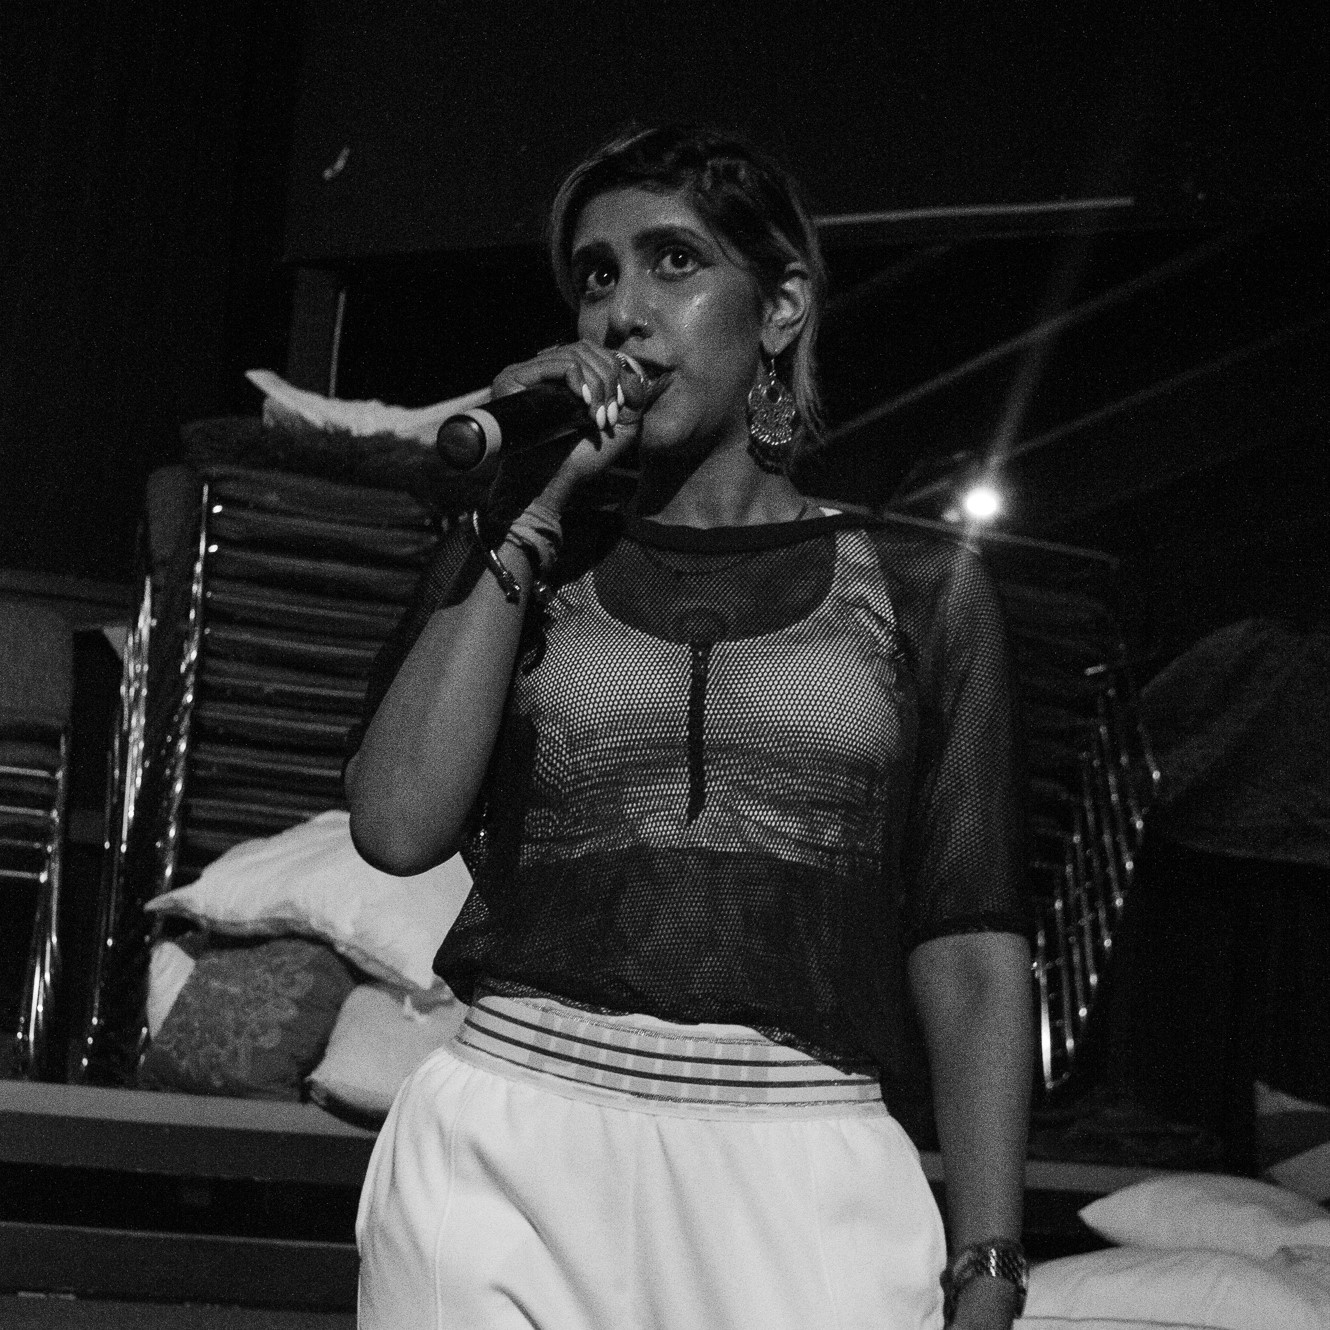 a dark-skinned individual holding a microphone and rapping on a stage